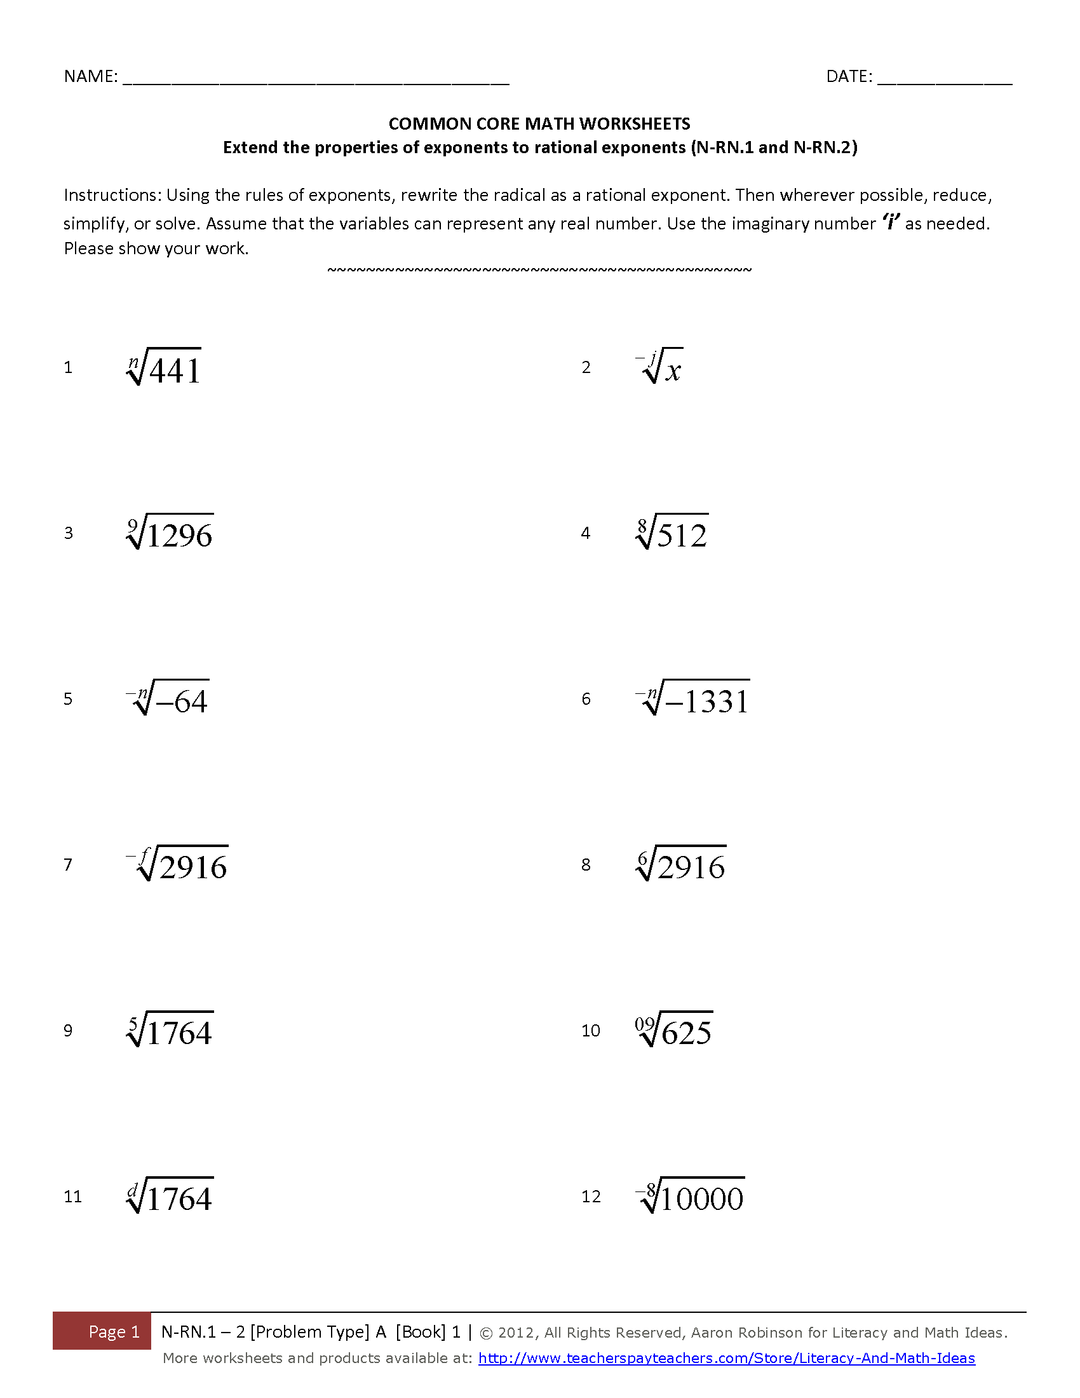 Worksheets for Common Core Math N-RN.1 and N-RN.2 Rational Exponents (Book A1)